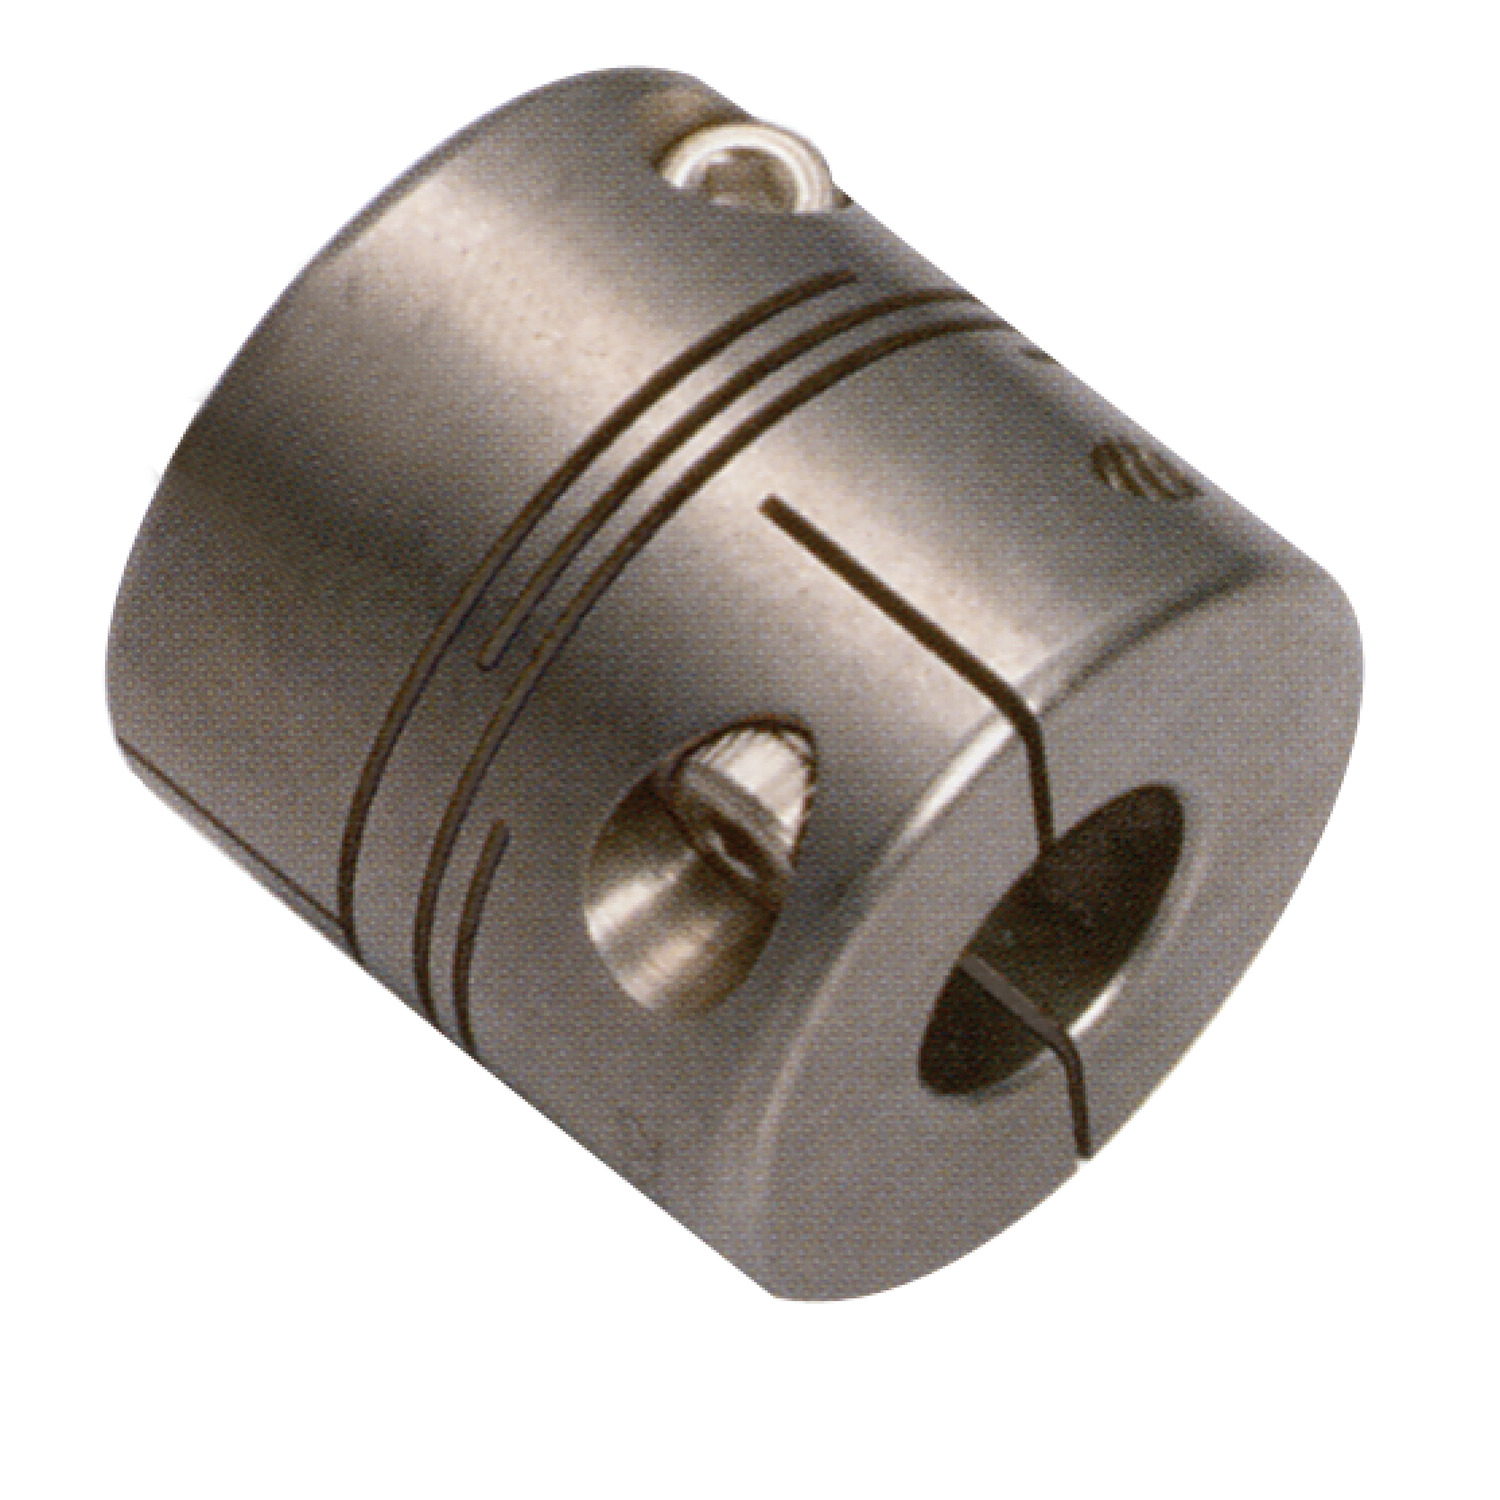 R3006.2 - Spiral Beam Coupling - stainless steel